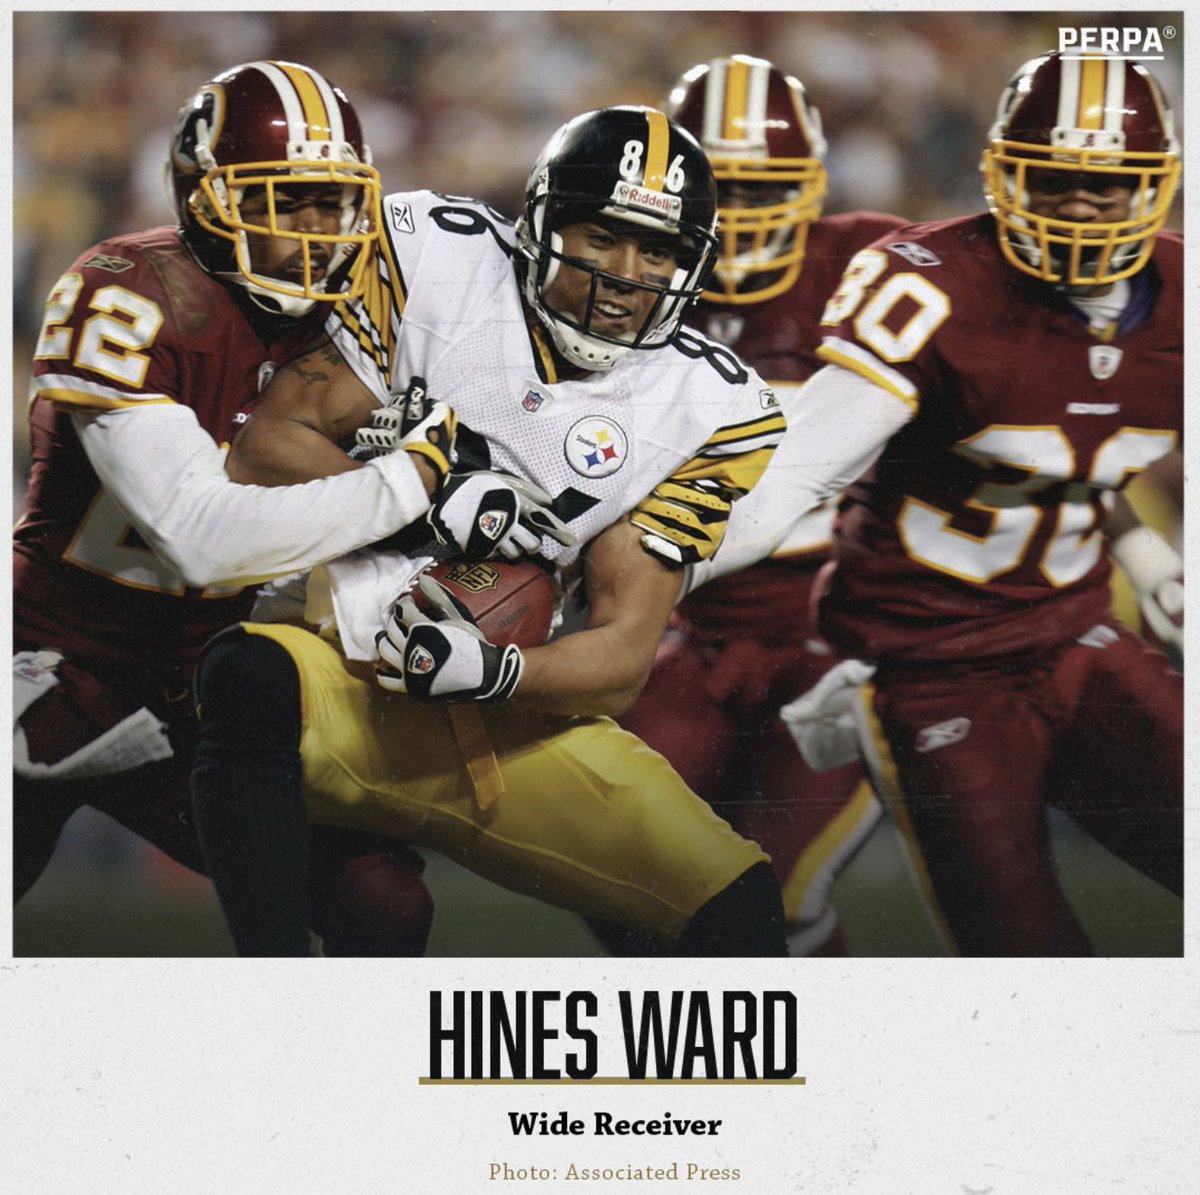 In celebration of Asian American and Pacific Islander Heritage Month, we recognize Hines Ward. Born in South Korea, Ward was drafted by the Pittsburgh Steelers in 1998. His impressive career included two Super Bowls (XL and XLIII) as well as MVP of Super Bowl XL 🏆@mvp86hinesward